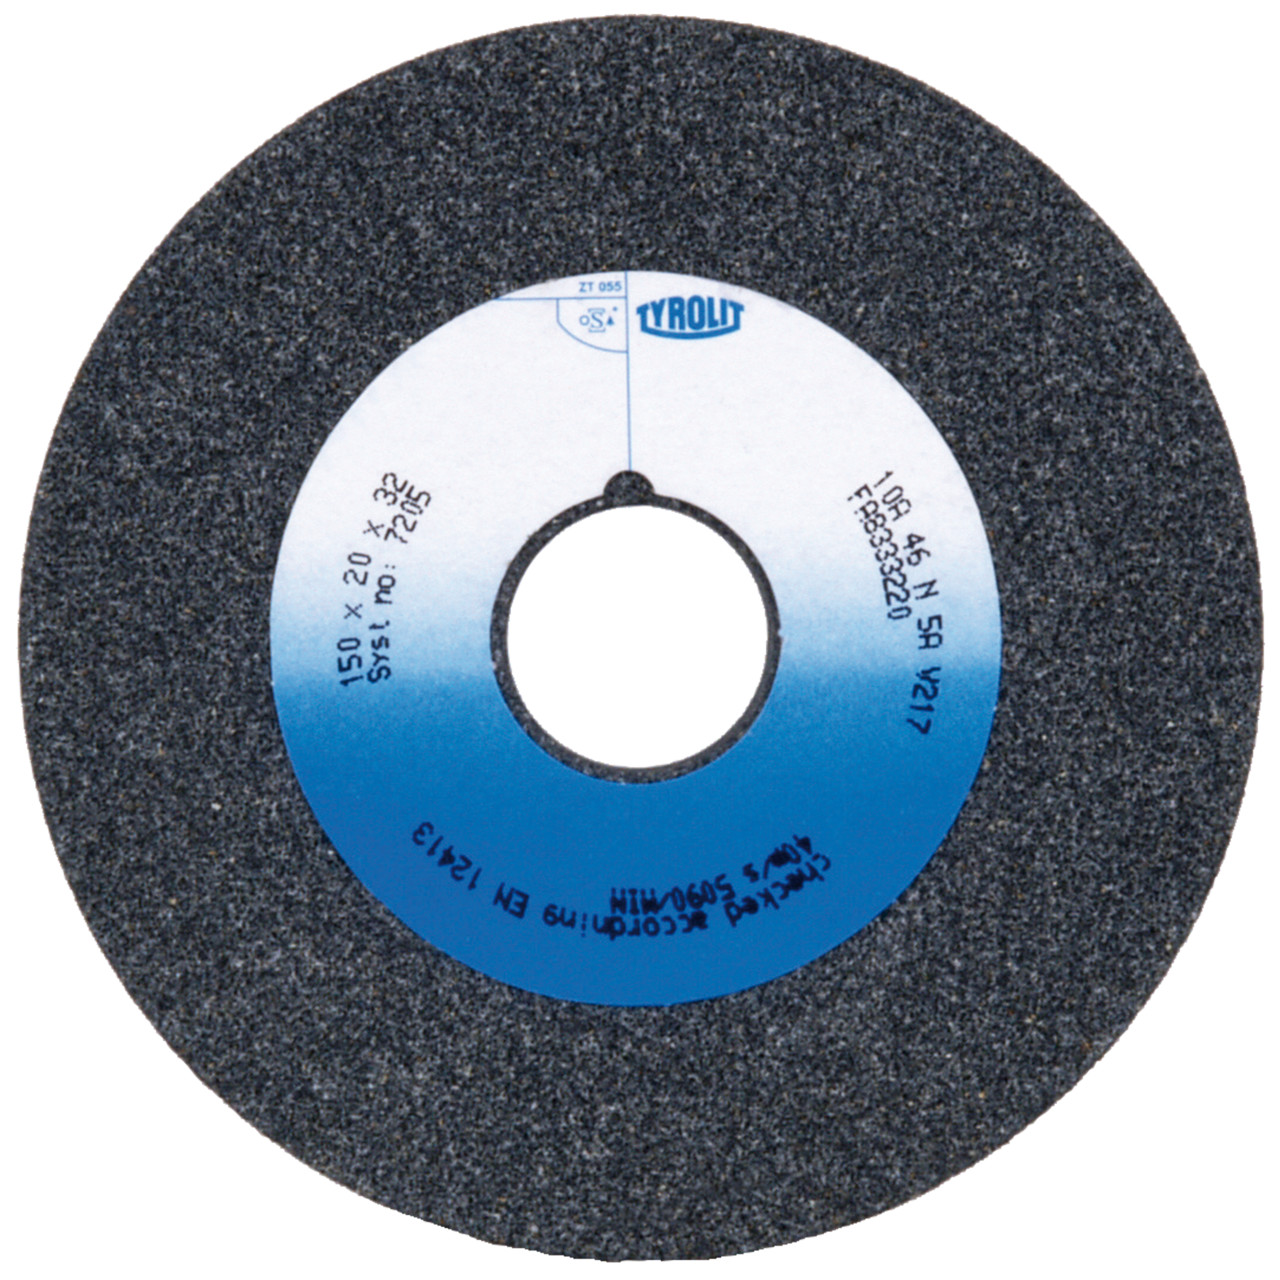 Tyrolit Conventional ceramic grinding discs DxDxH 200x25x51 For unalloyed and low-alloy steels, shape: 1, Art. 147652